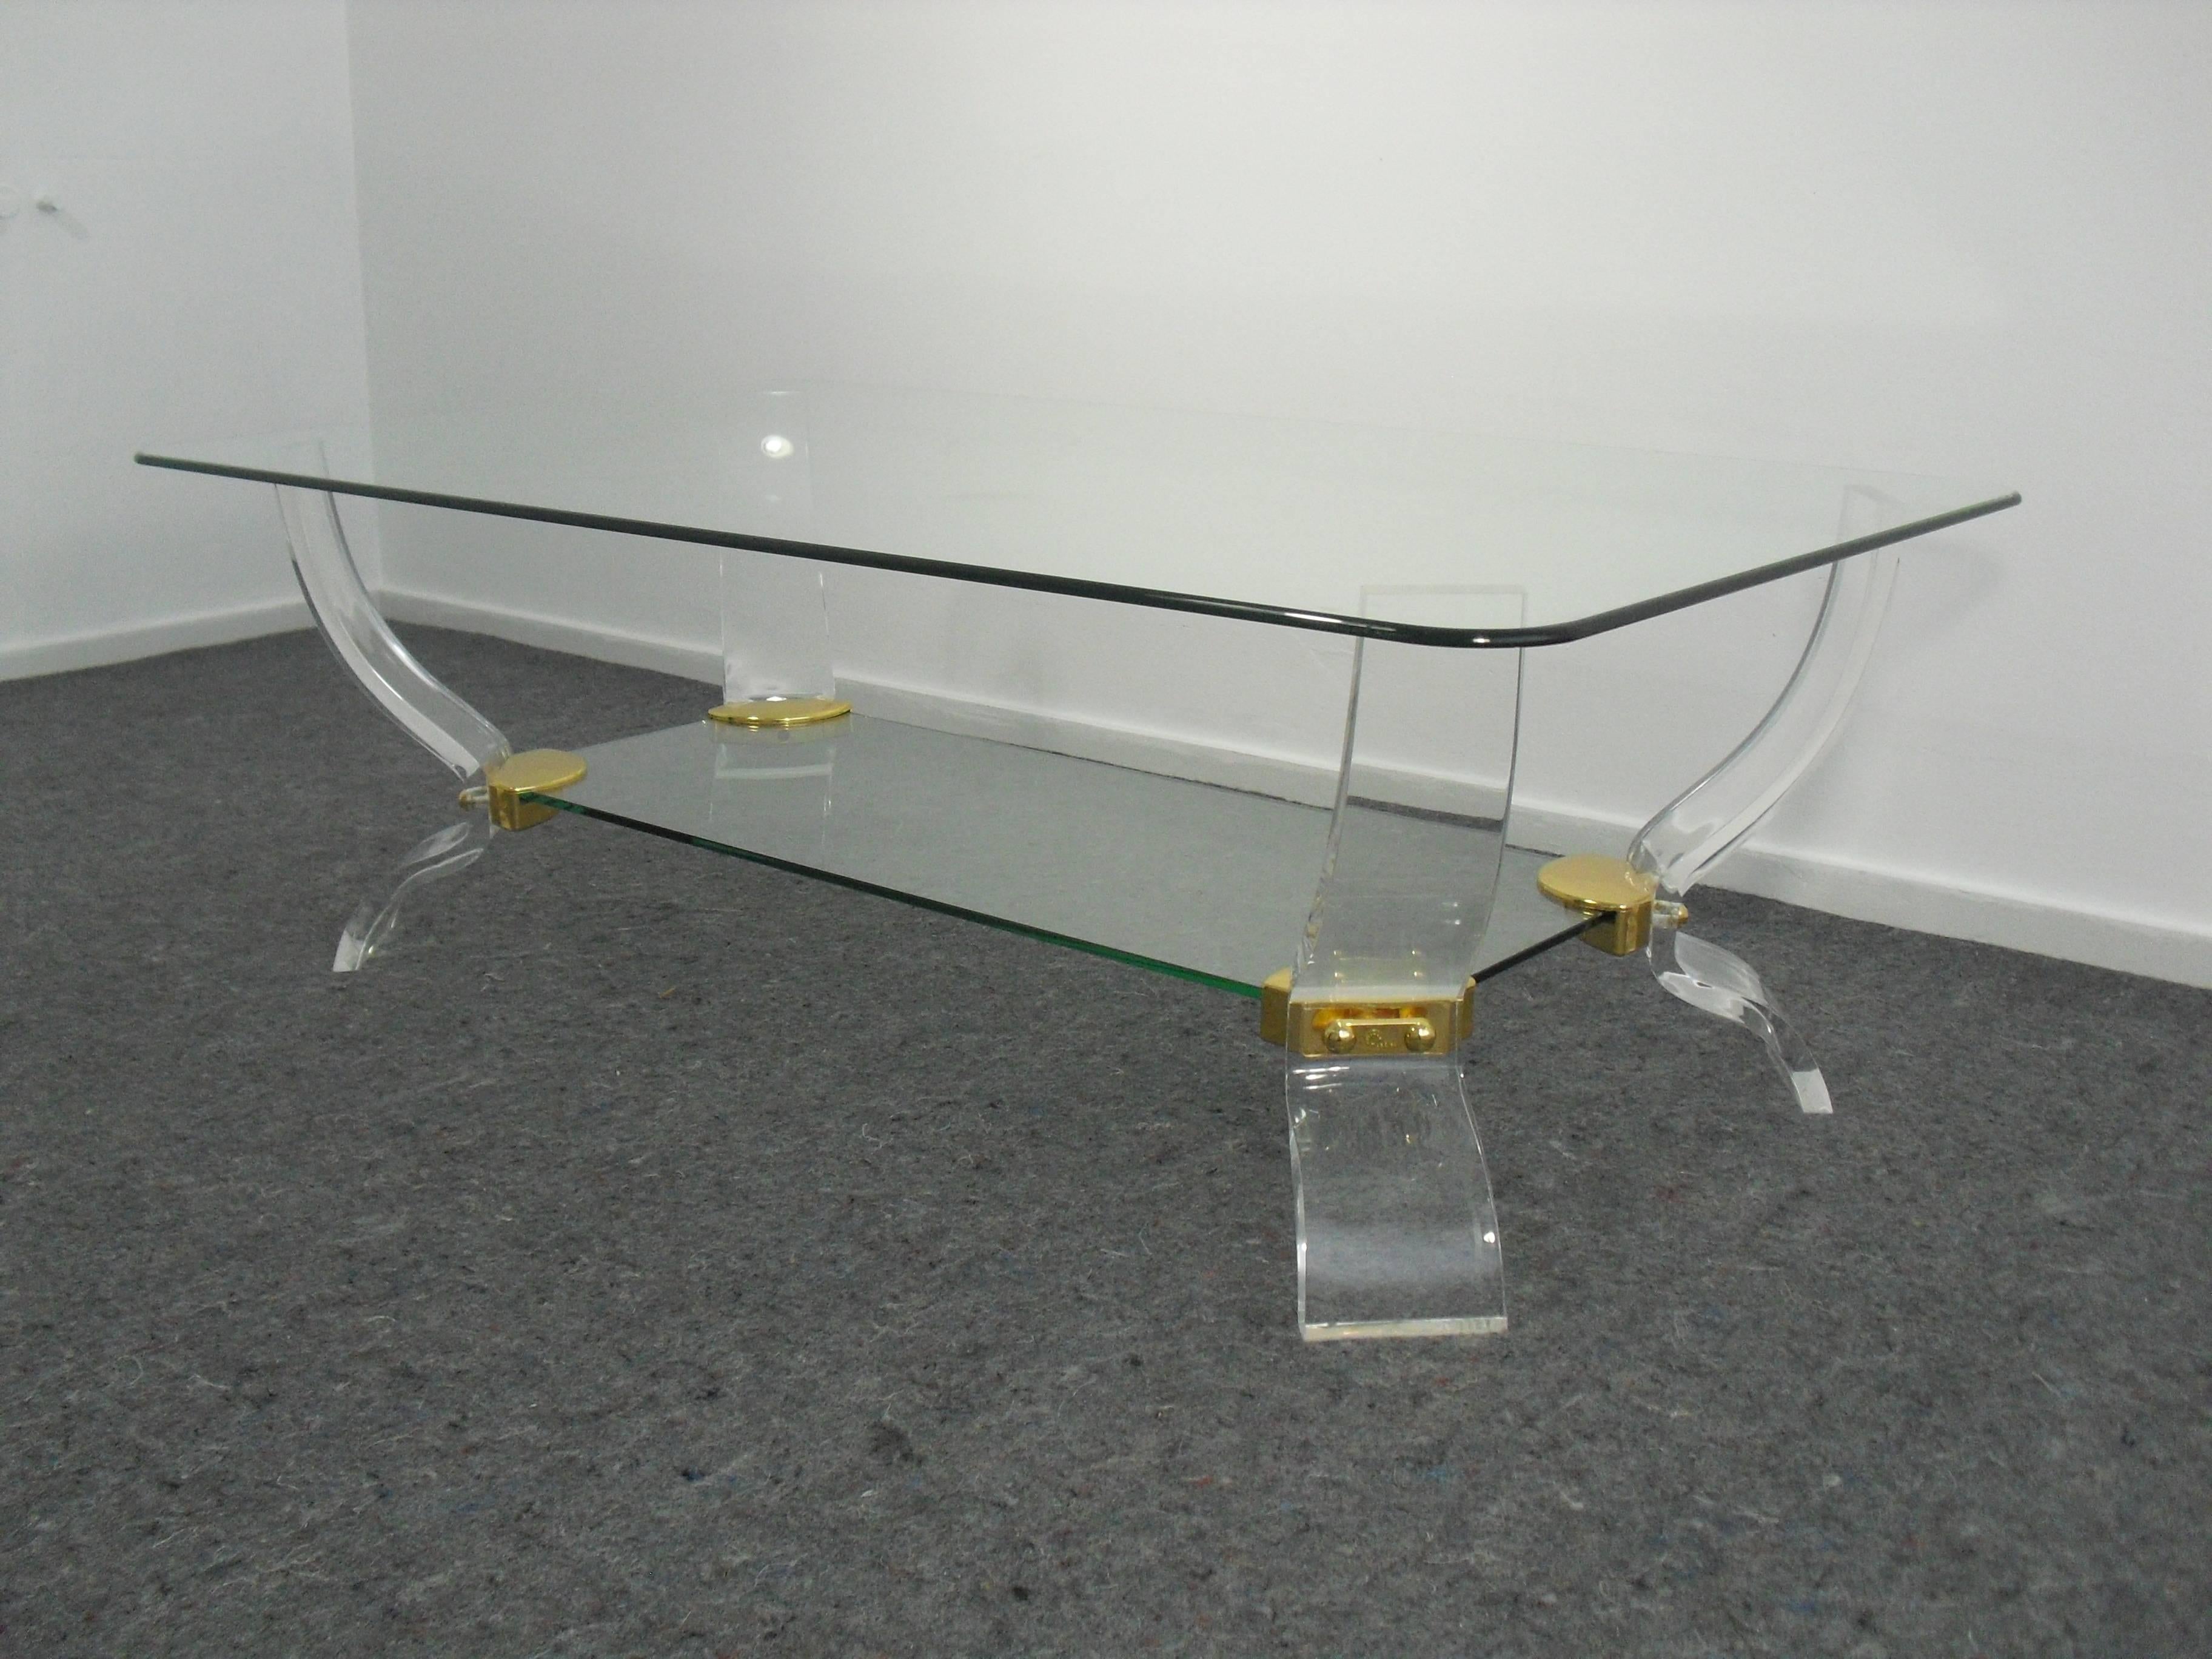 Spanish Design Perspex Coffee Table by Curvasa Meubles.

Manufacturer: Curvasa Meubles
Country: Spain
Period: 1980's
Dimensions: H40 cm x W120 cm x D70 cm.
Condition: Good condition, normal signs of use.